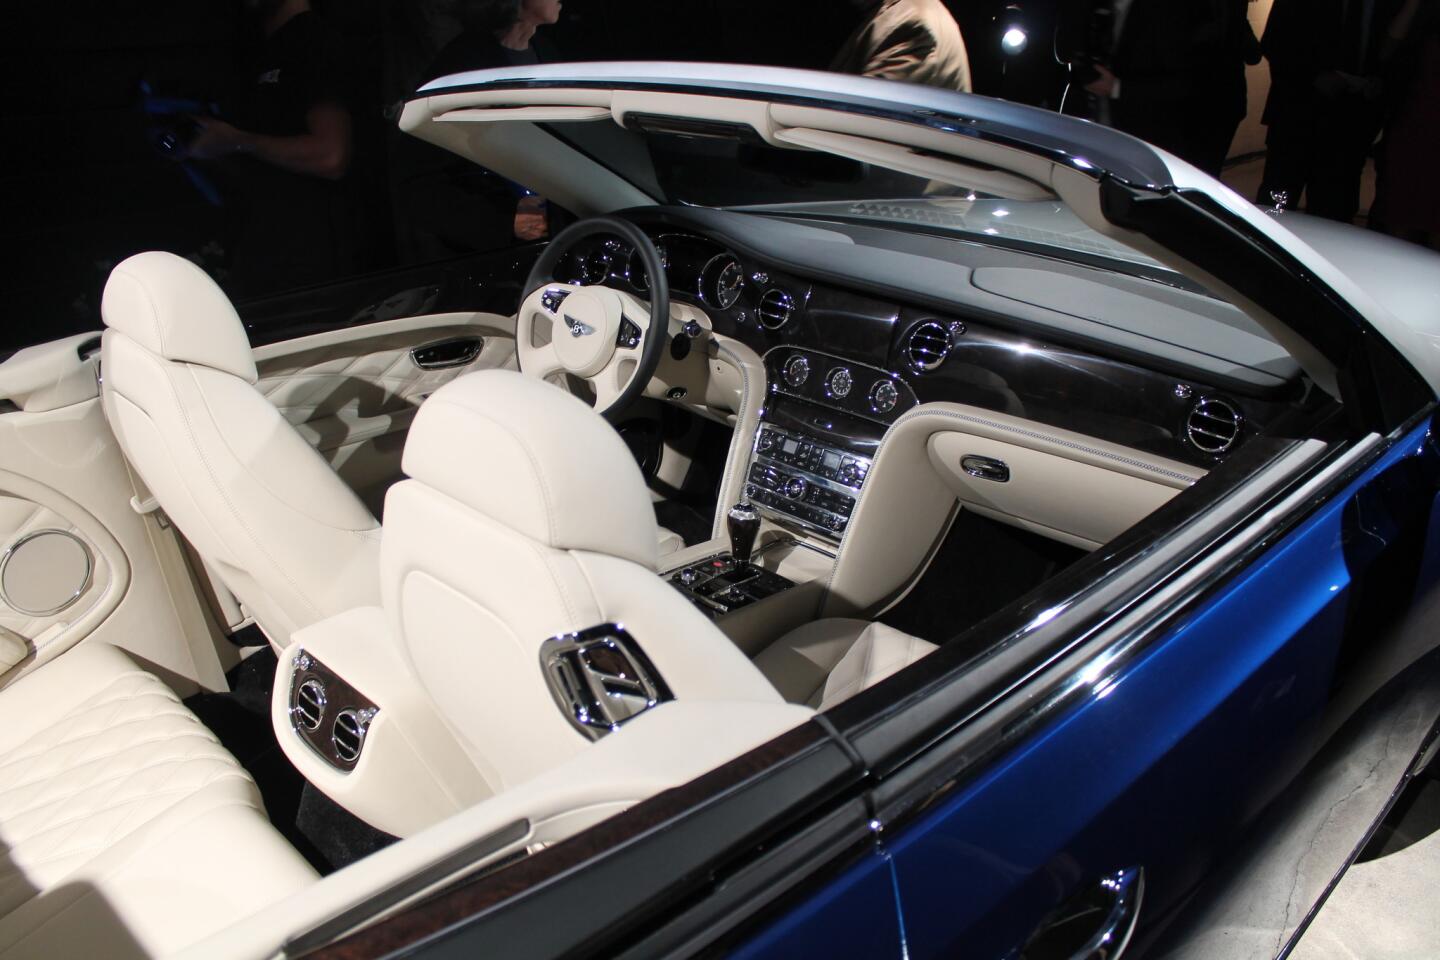 Bentley unveiled this Grand Convertible ahead of its appearance at the L.A. Auto Show. It's a concept car based on the Mulsanne Speed sedan that will likely see production.